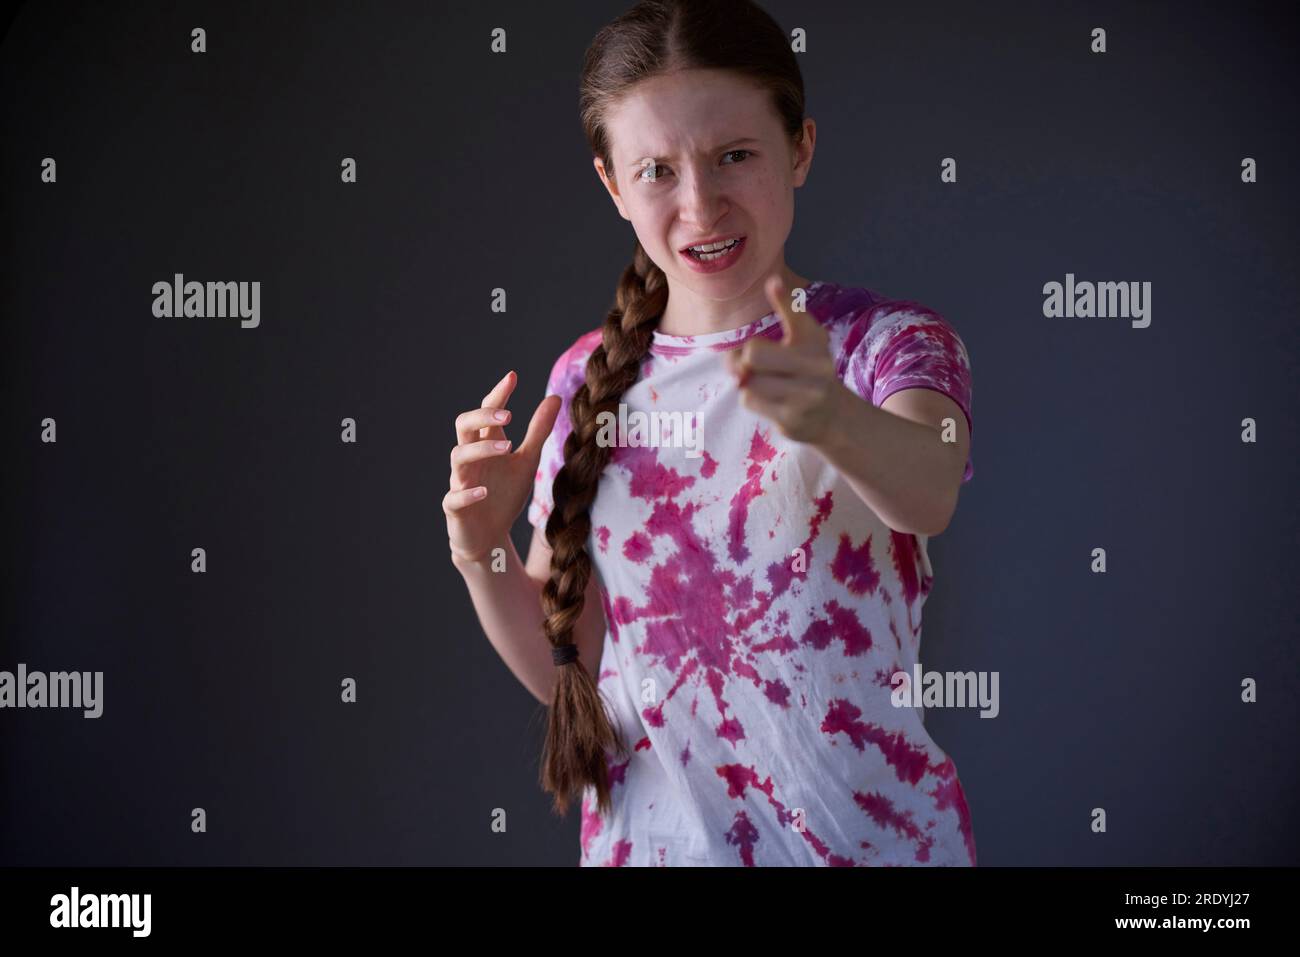 Studio Portrait Of Angry And Frustrated Teenage Girl Shouting At Camera Stock Photo